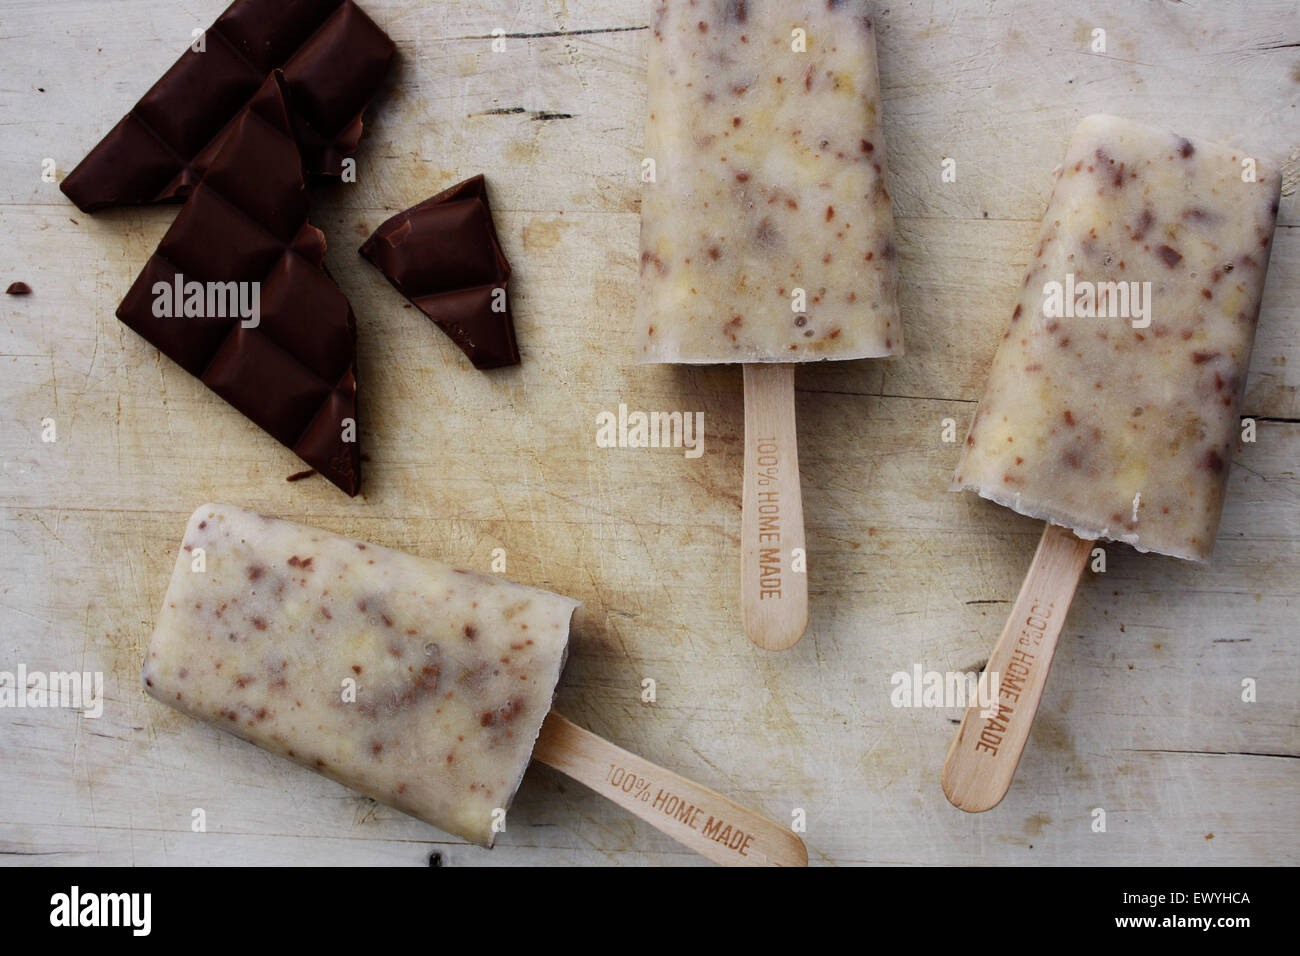 Elevated View Of Chocolate And Chocolate Ice Lollies Stock Photo Alamy